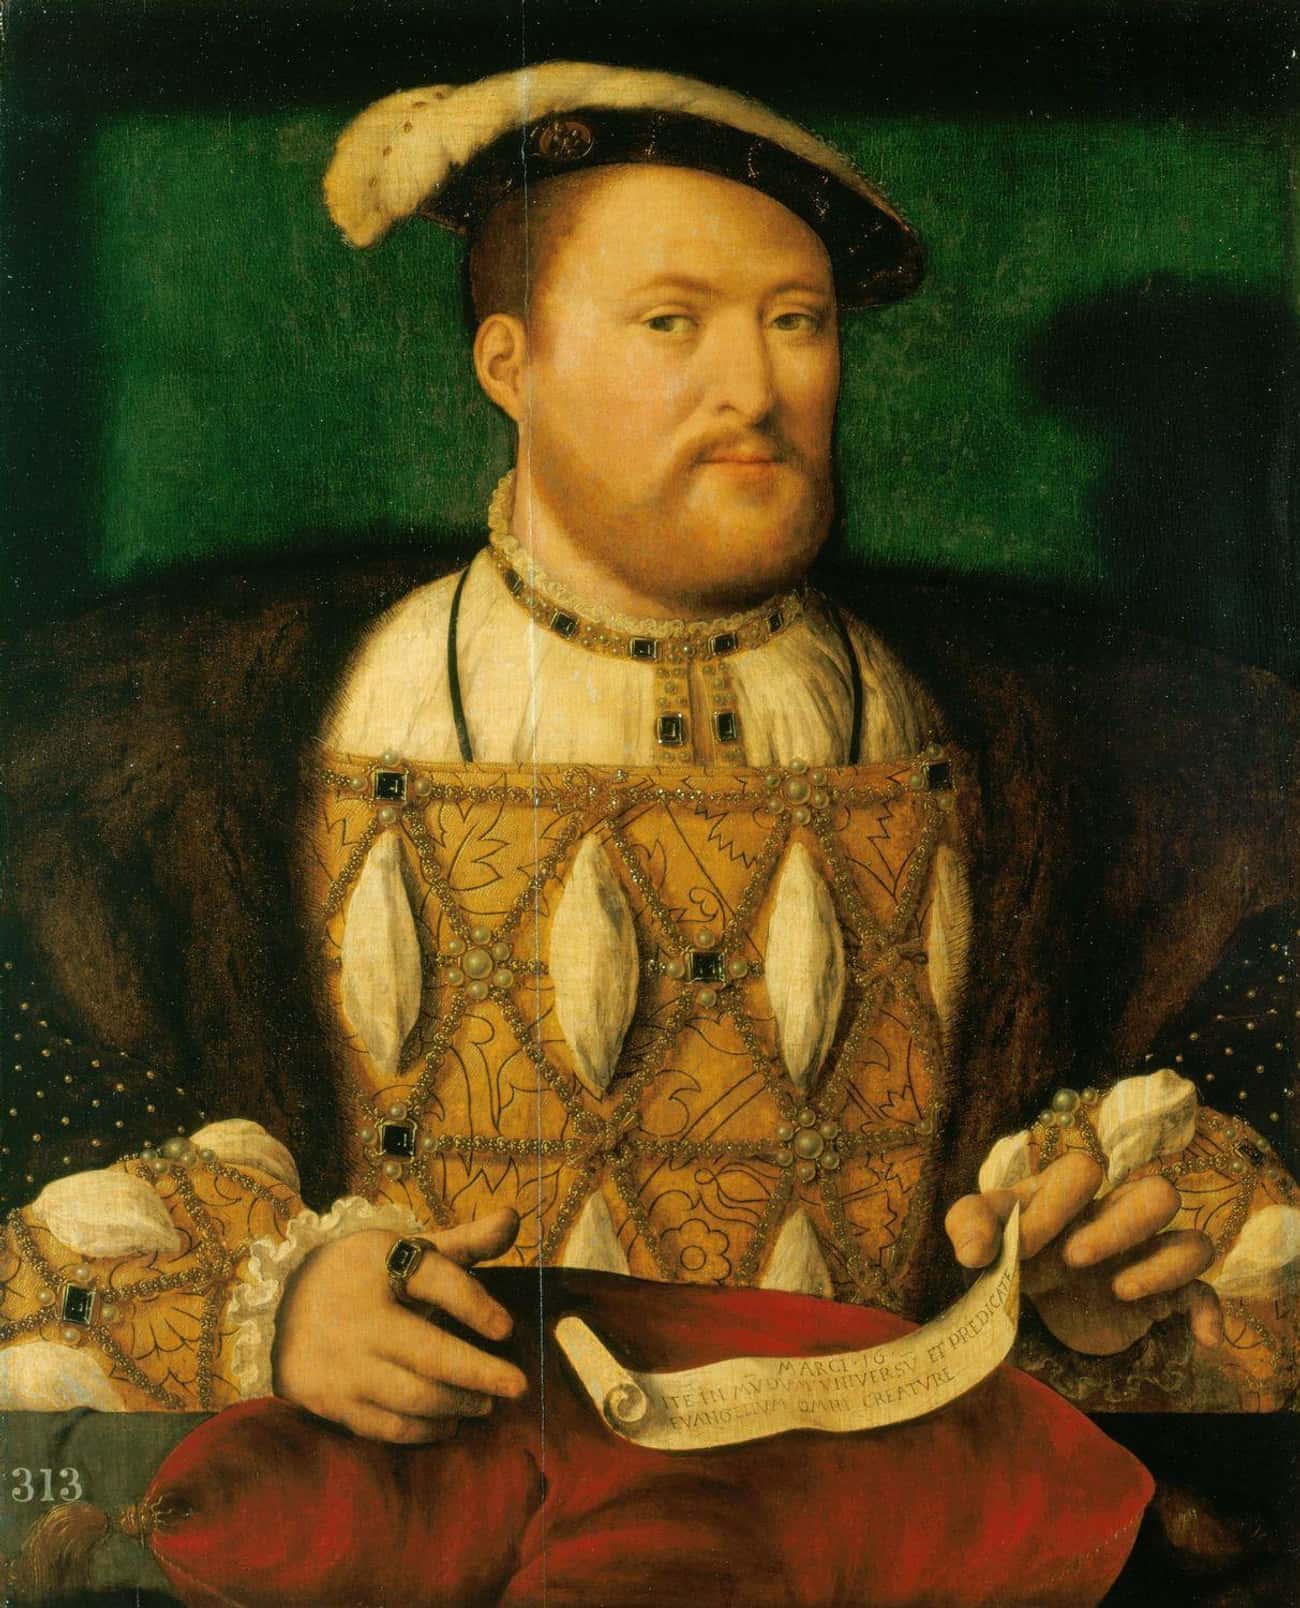 King Henry VIII Created His Own Church In Order To Divorce Catherine Of Aragon